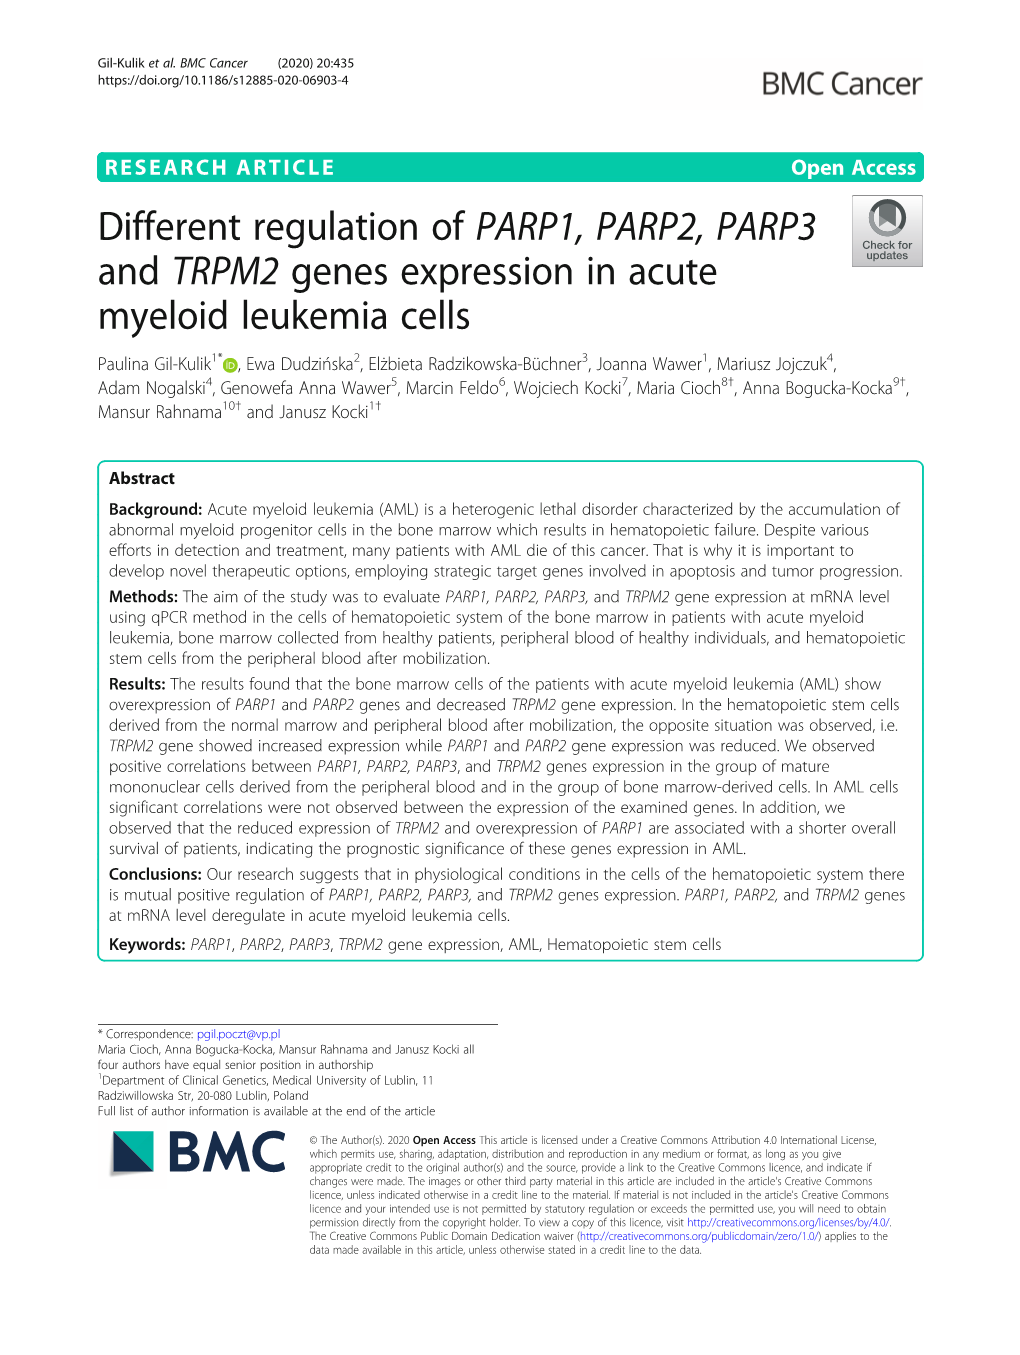 Different Regulation of PARP1, PARP2, PARP3 and TRPM2 Genes Expression in Acute Myeloid Leukemia Cells